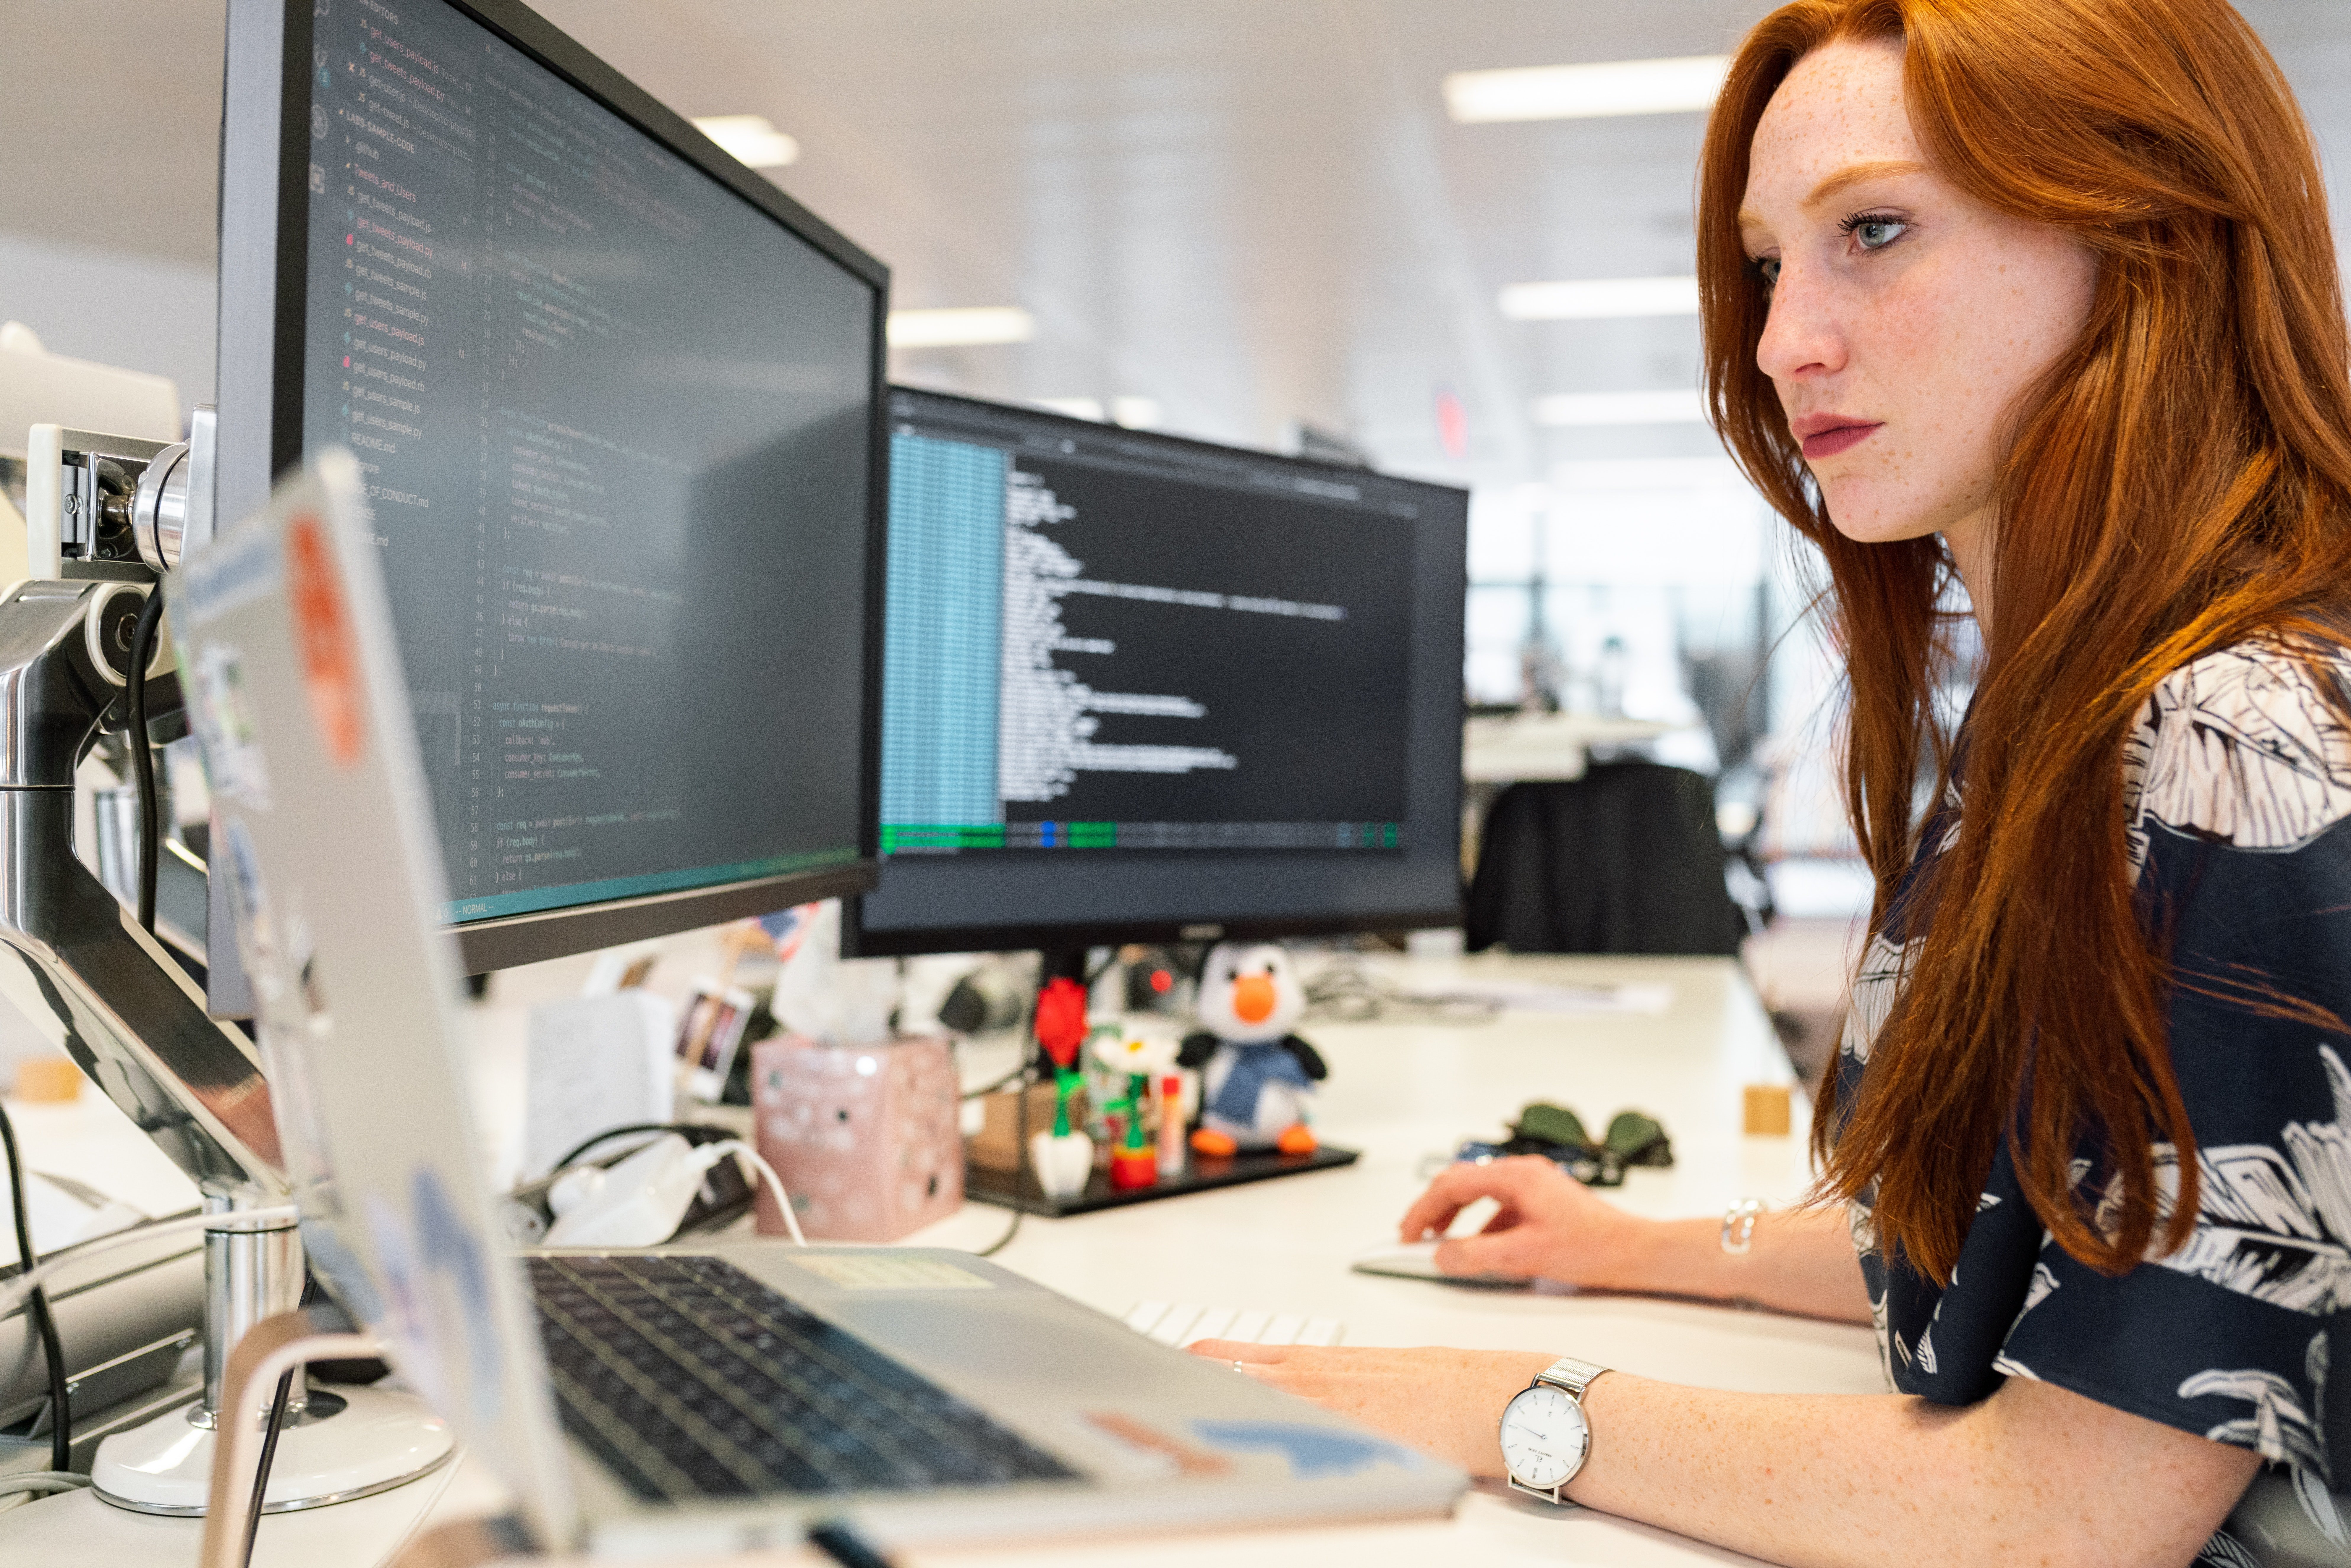 Sandra was a coder by profession | Photo: Pexels